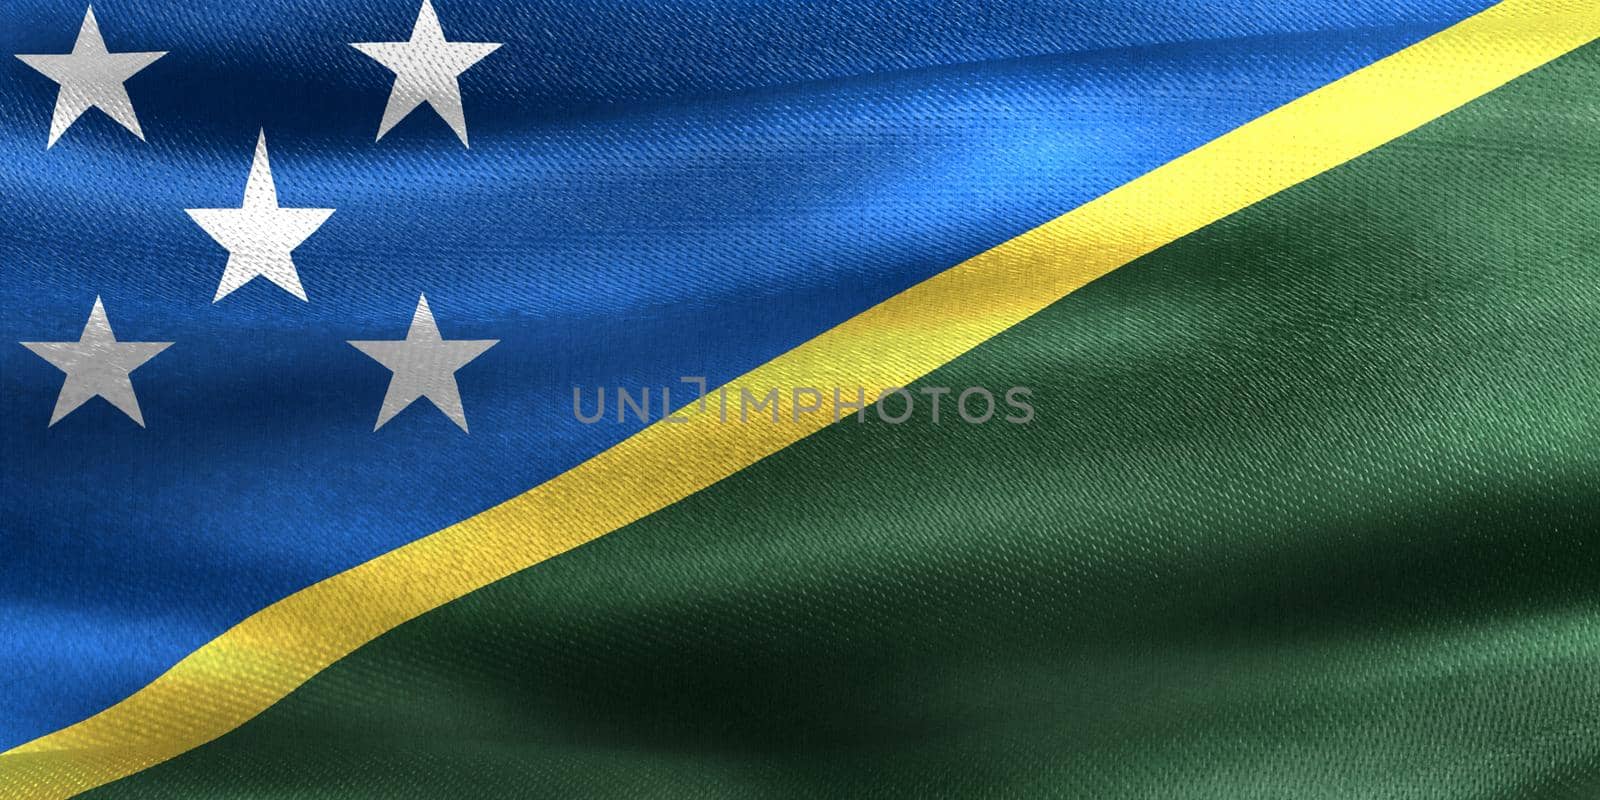 3D-Illustration of a Solomon Islands flag - realistic waving fabric flag by MP_foto71